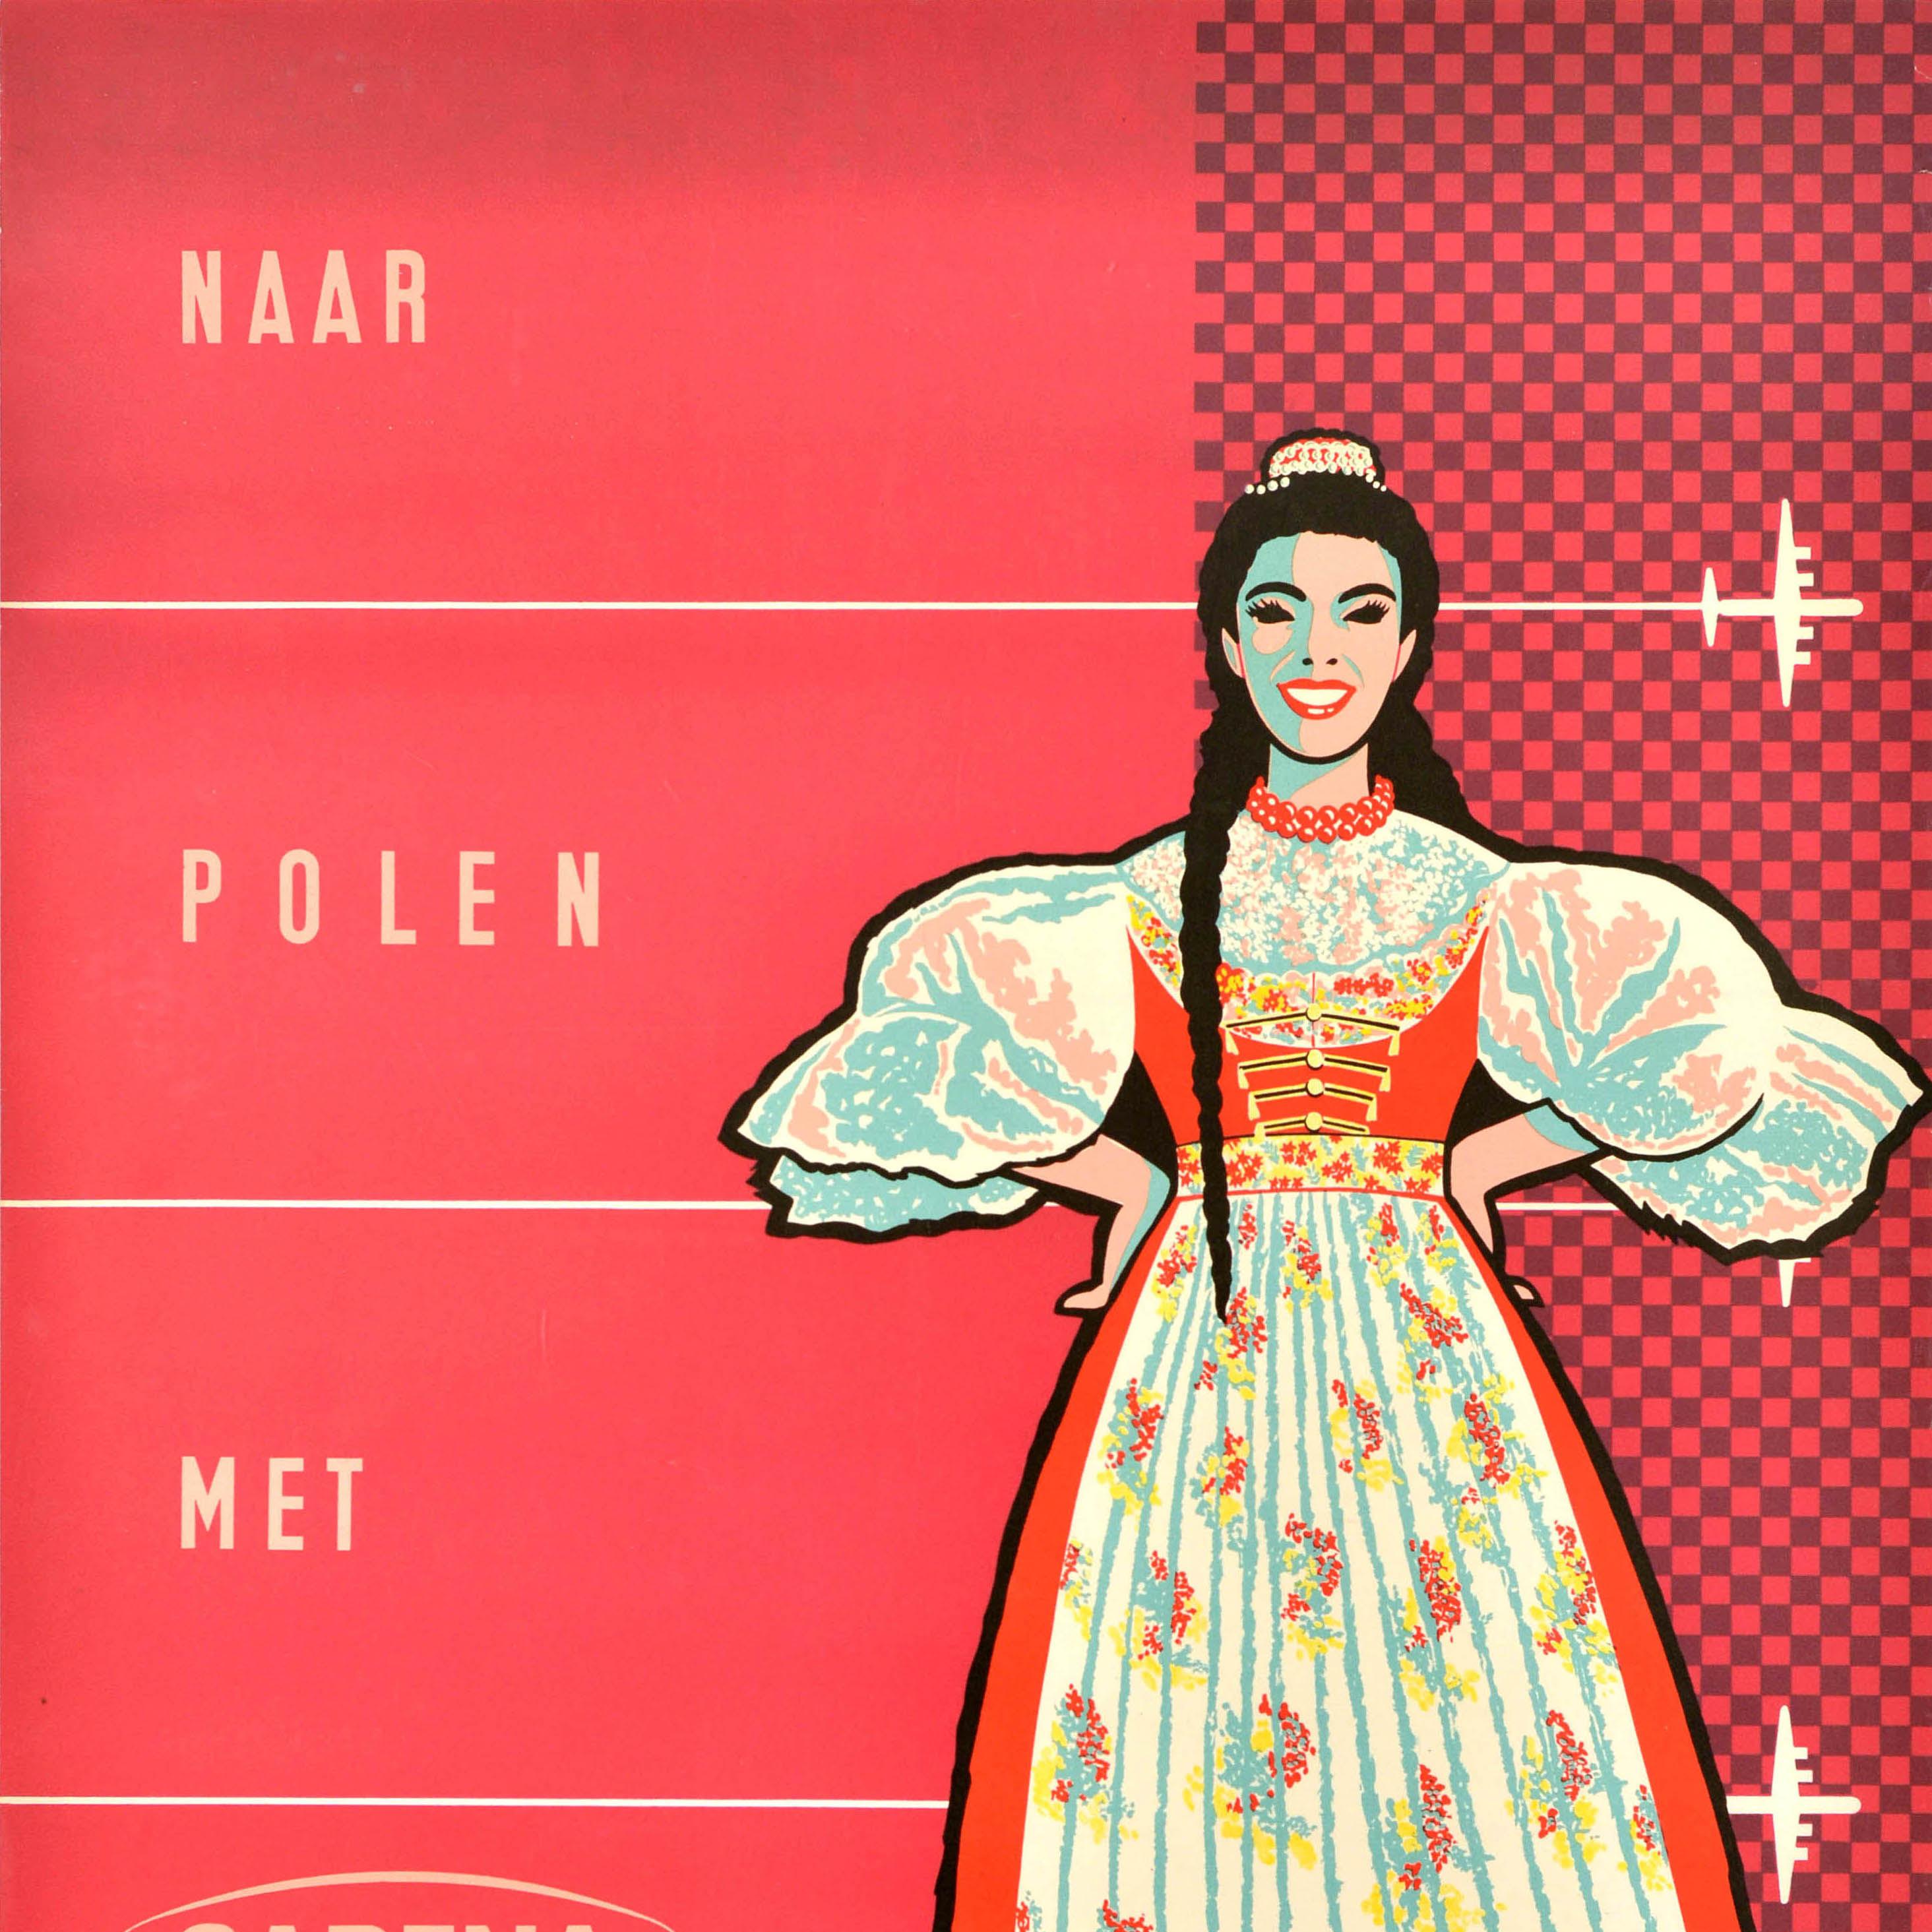 Original vintage travel advertising poster - Naar Polen met Sabena / To Poland by Sabena (the national airline of Belgium from 1923-2001), featuring a mid-century design showing a smiling lady in a traditional Polish dress set on a pink red